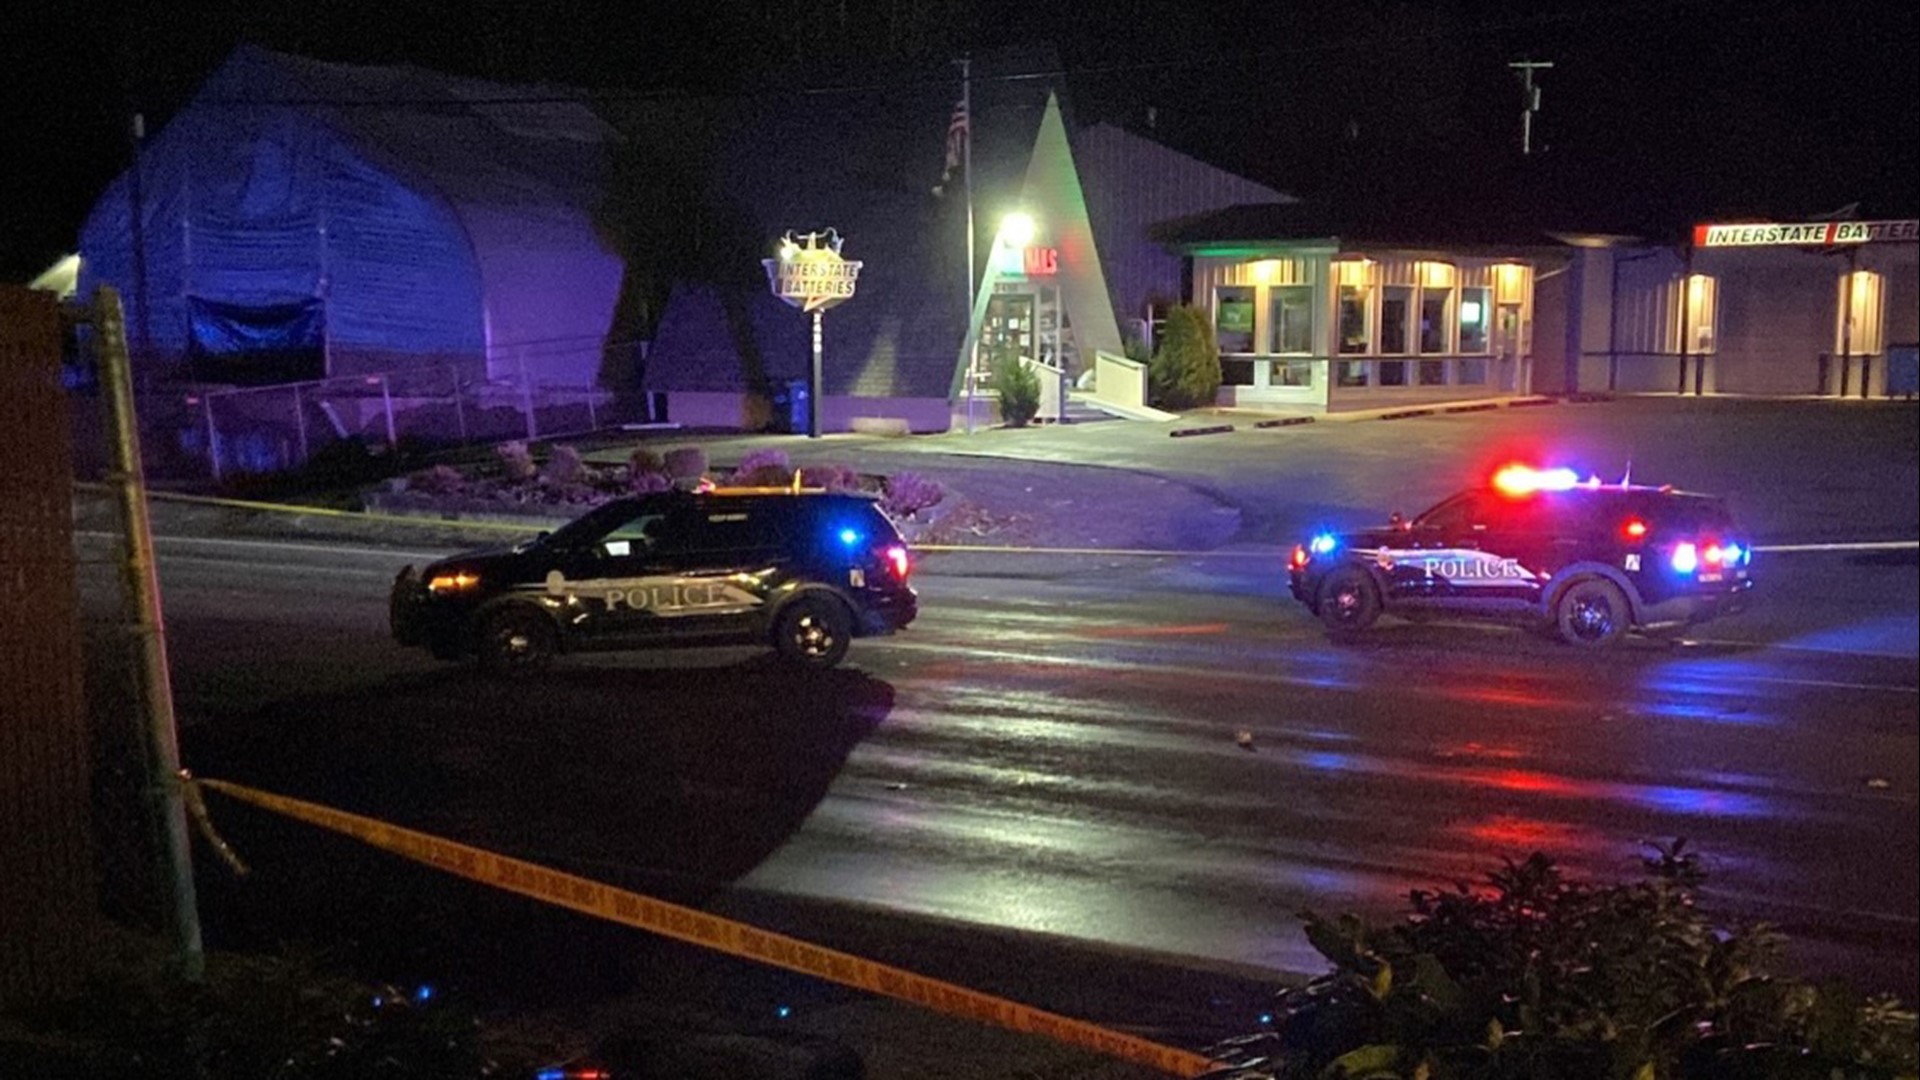 Police are investigating after a person was hit and killed by a car in Olympia early Friday morning. The driver of the vehicle did not stay at the scene.